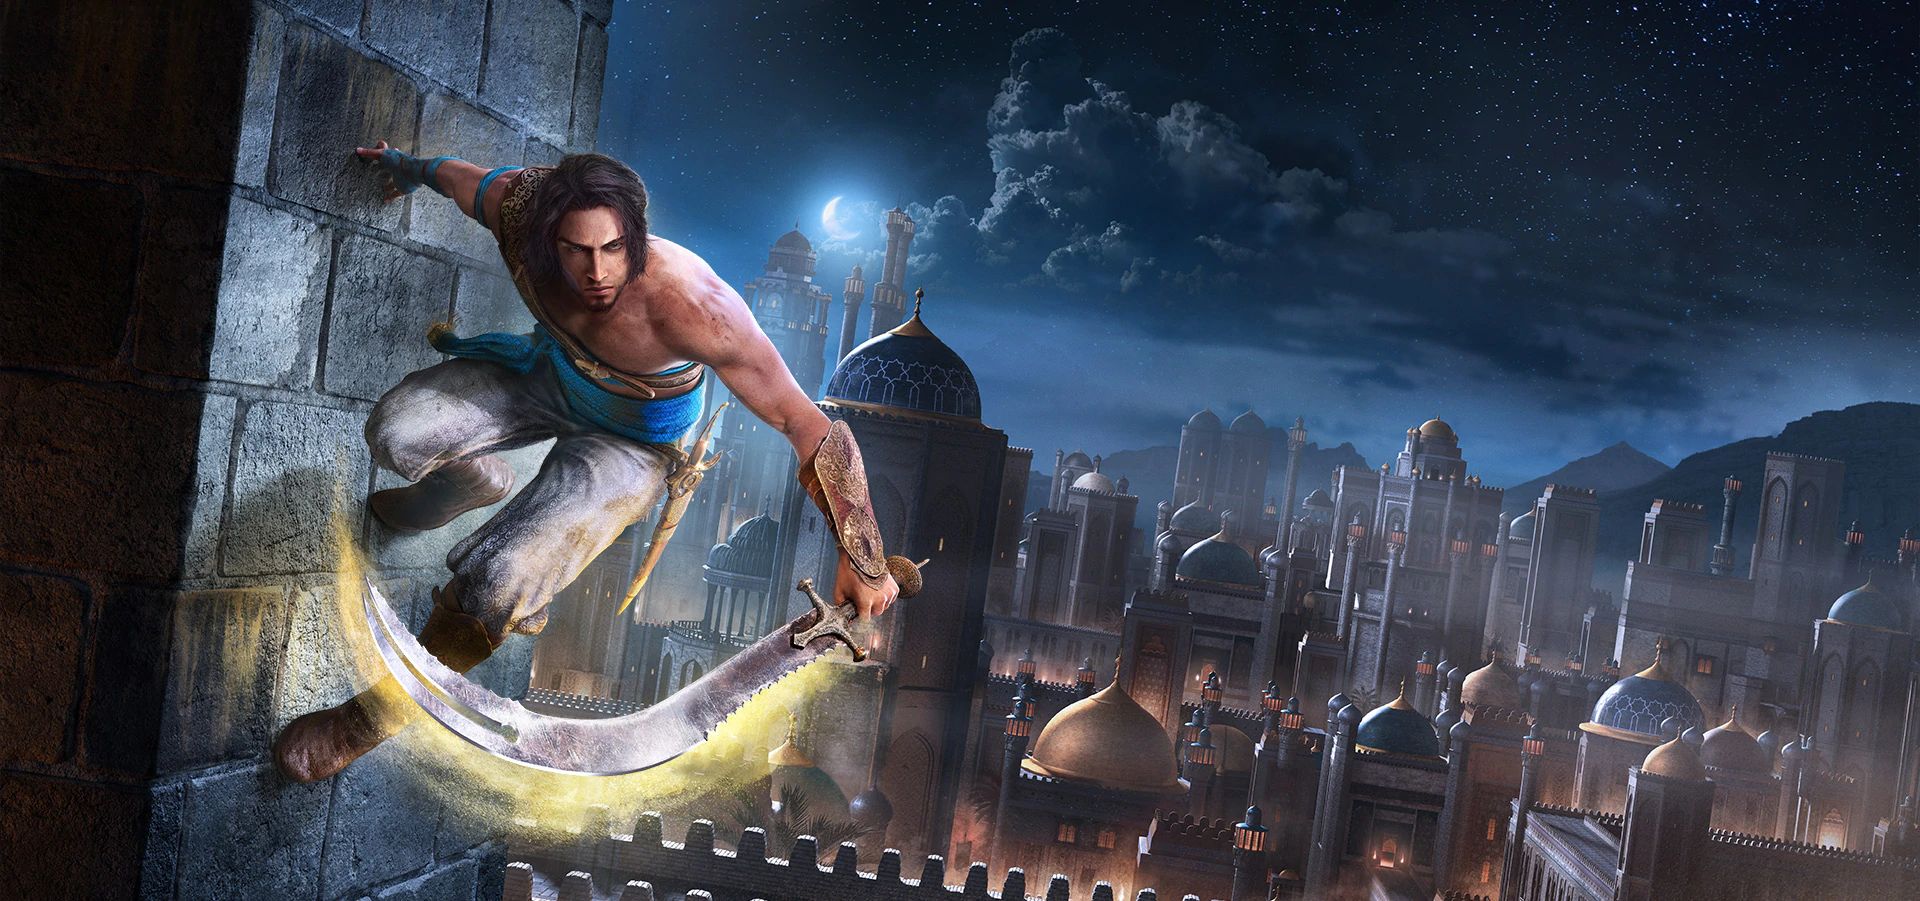 Image for Prince of Persia: The Sands of Time Remake development handed over to Ubisoft Montreal